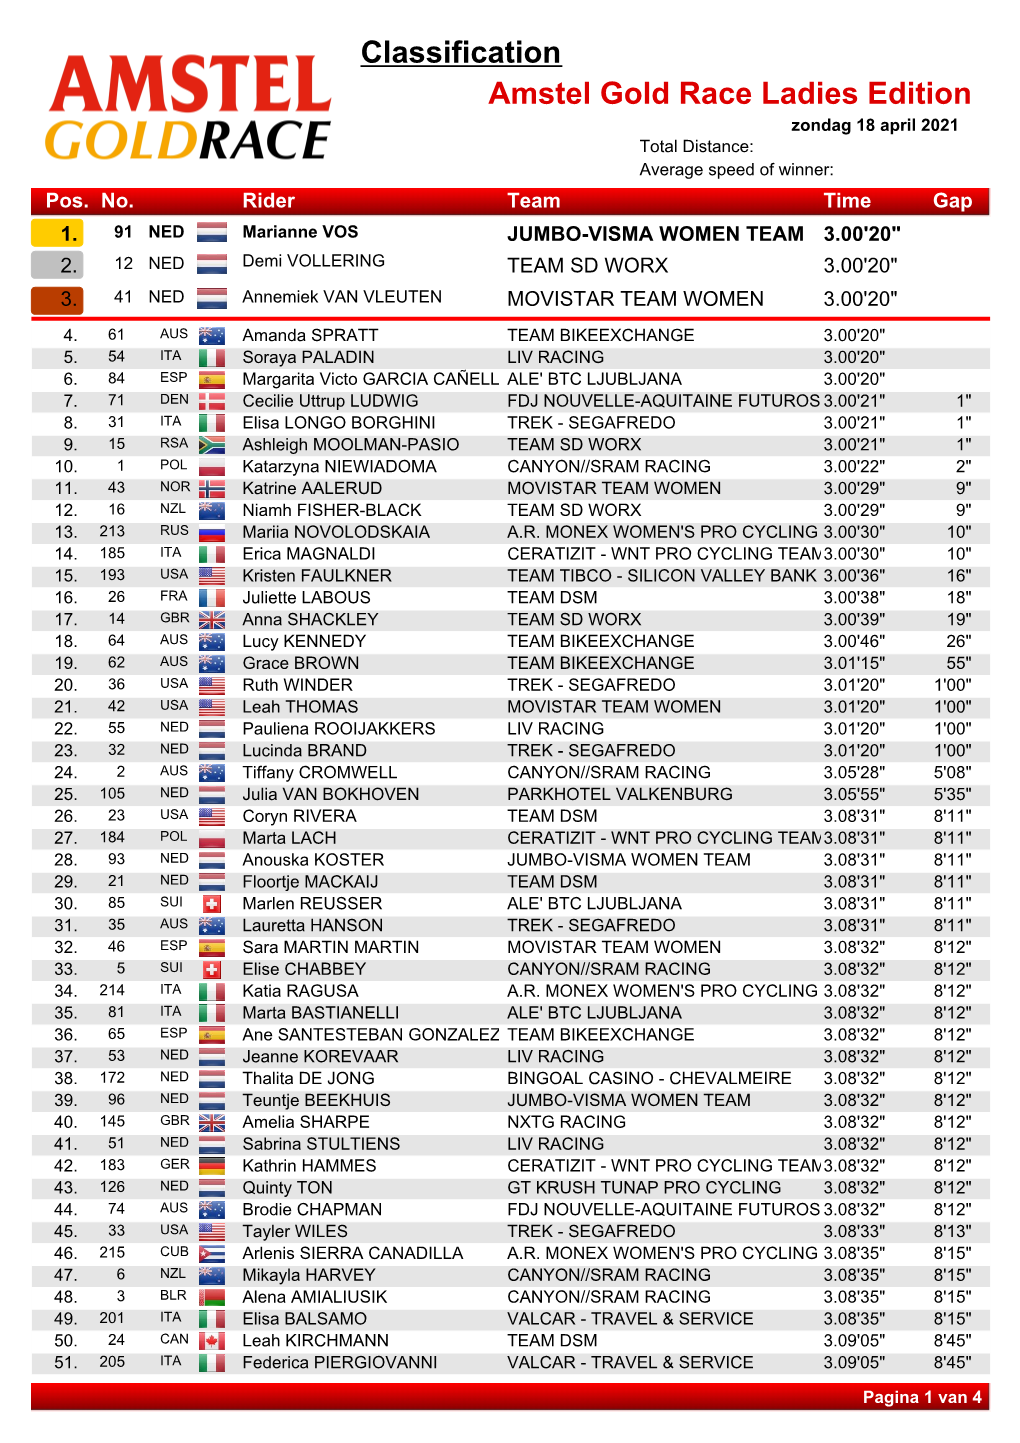 Classification Amstel Gold Race Ladies Edition Zondag 18 April 2021 Total Distance: Average Speed of Winner: Pos